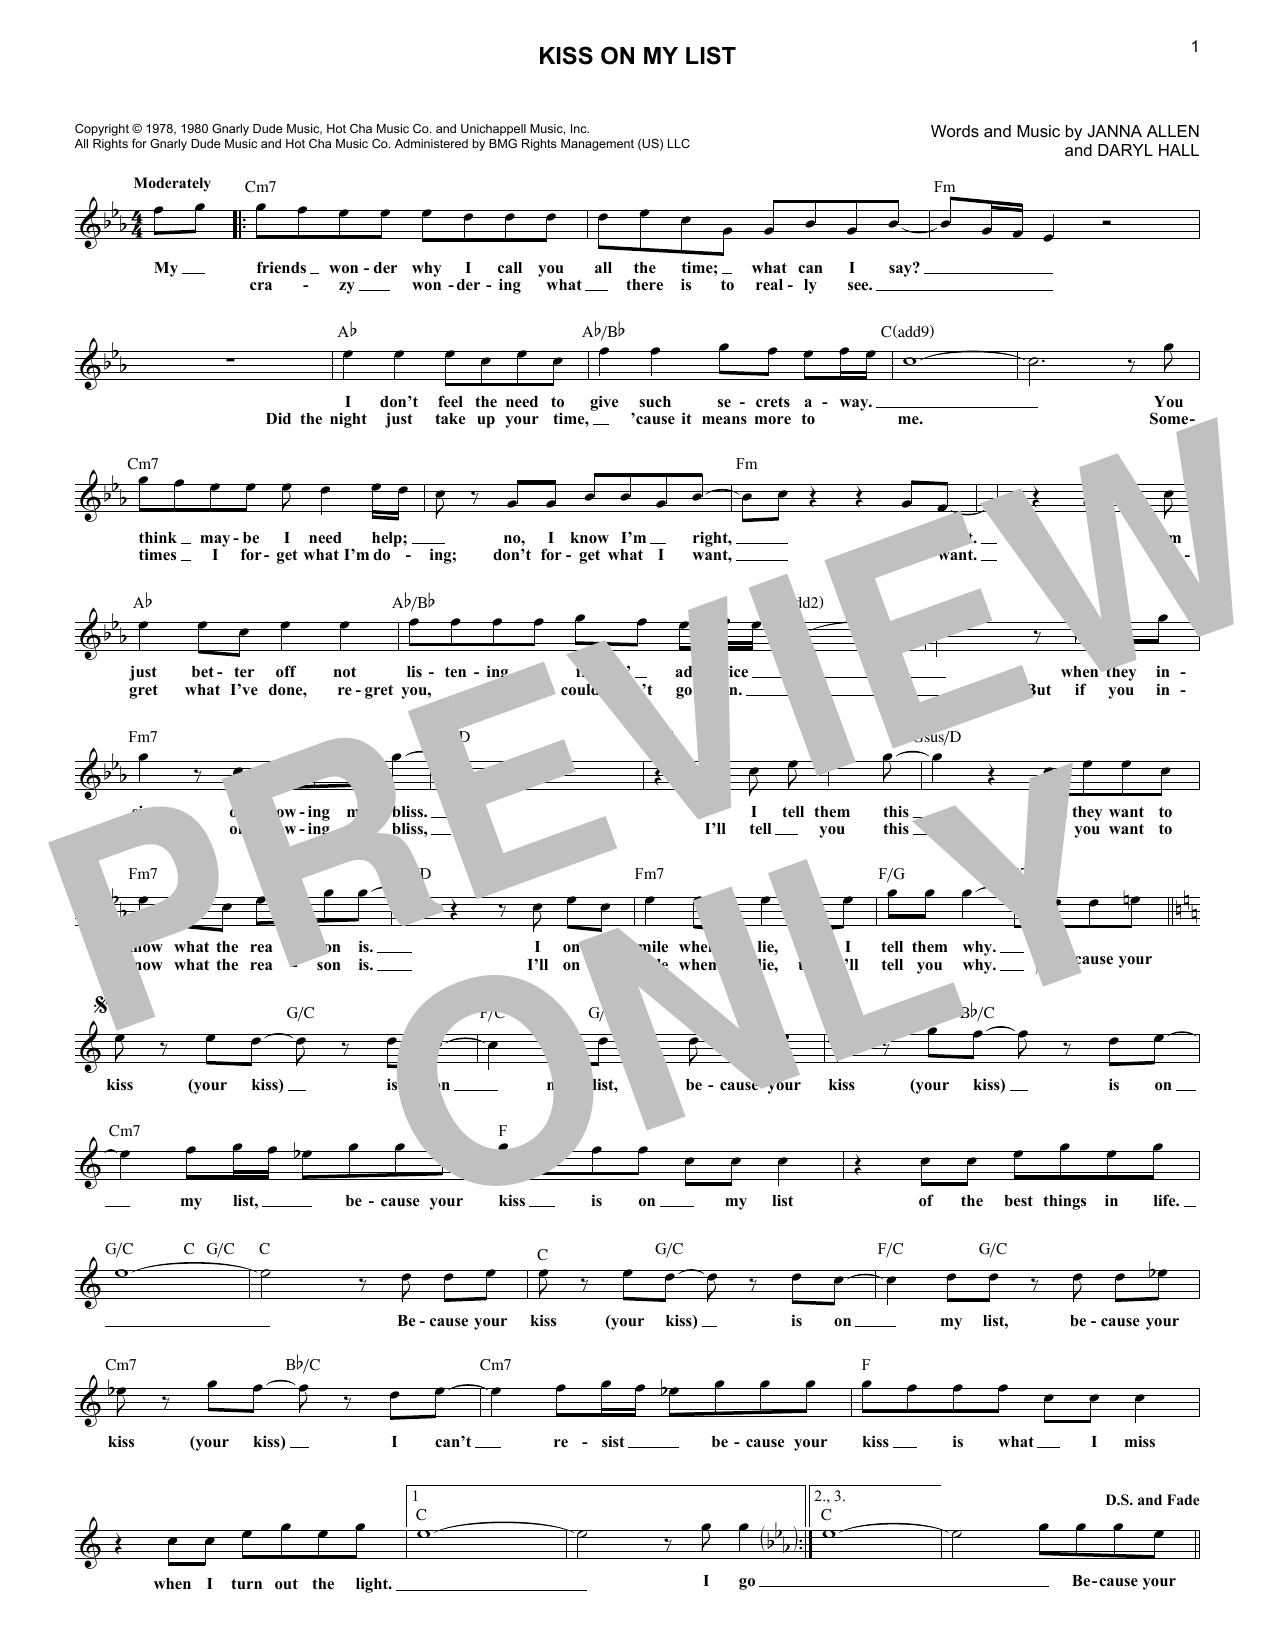 Download Hall & Oates Kiss On My List Sheet Music